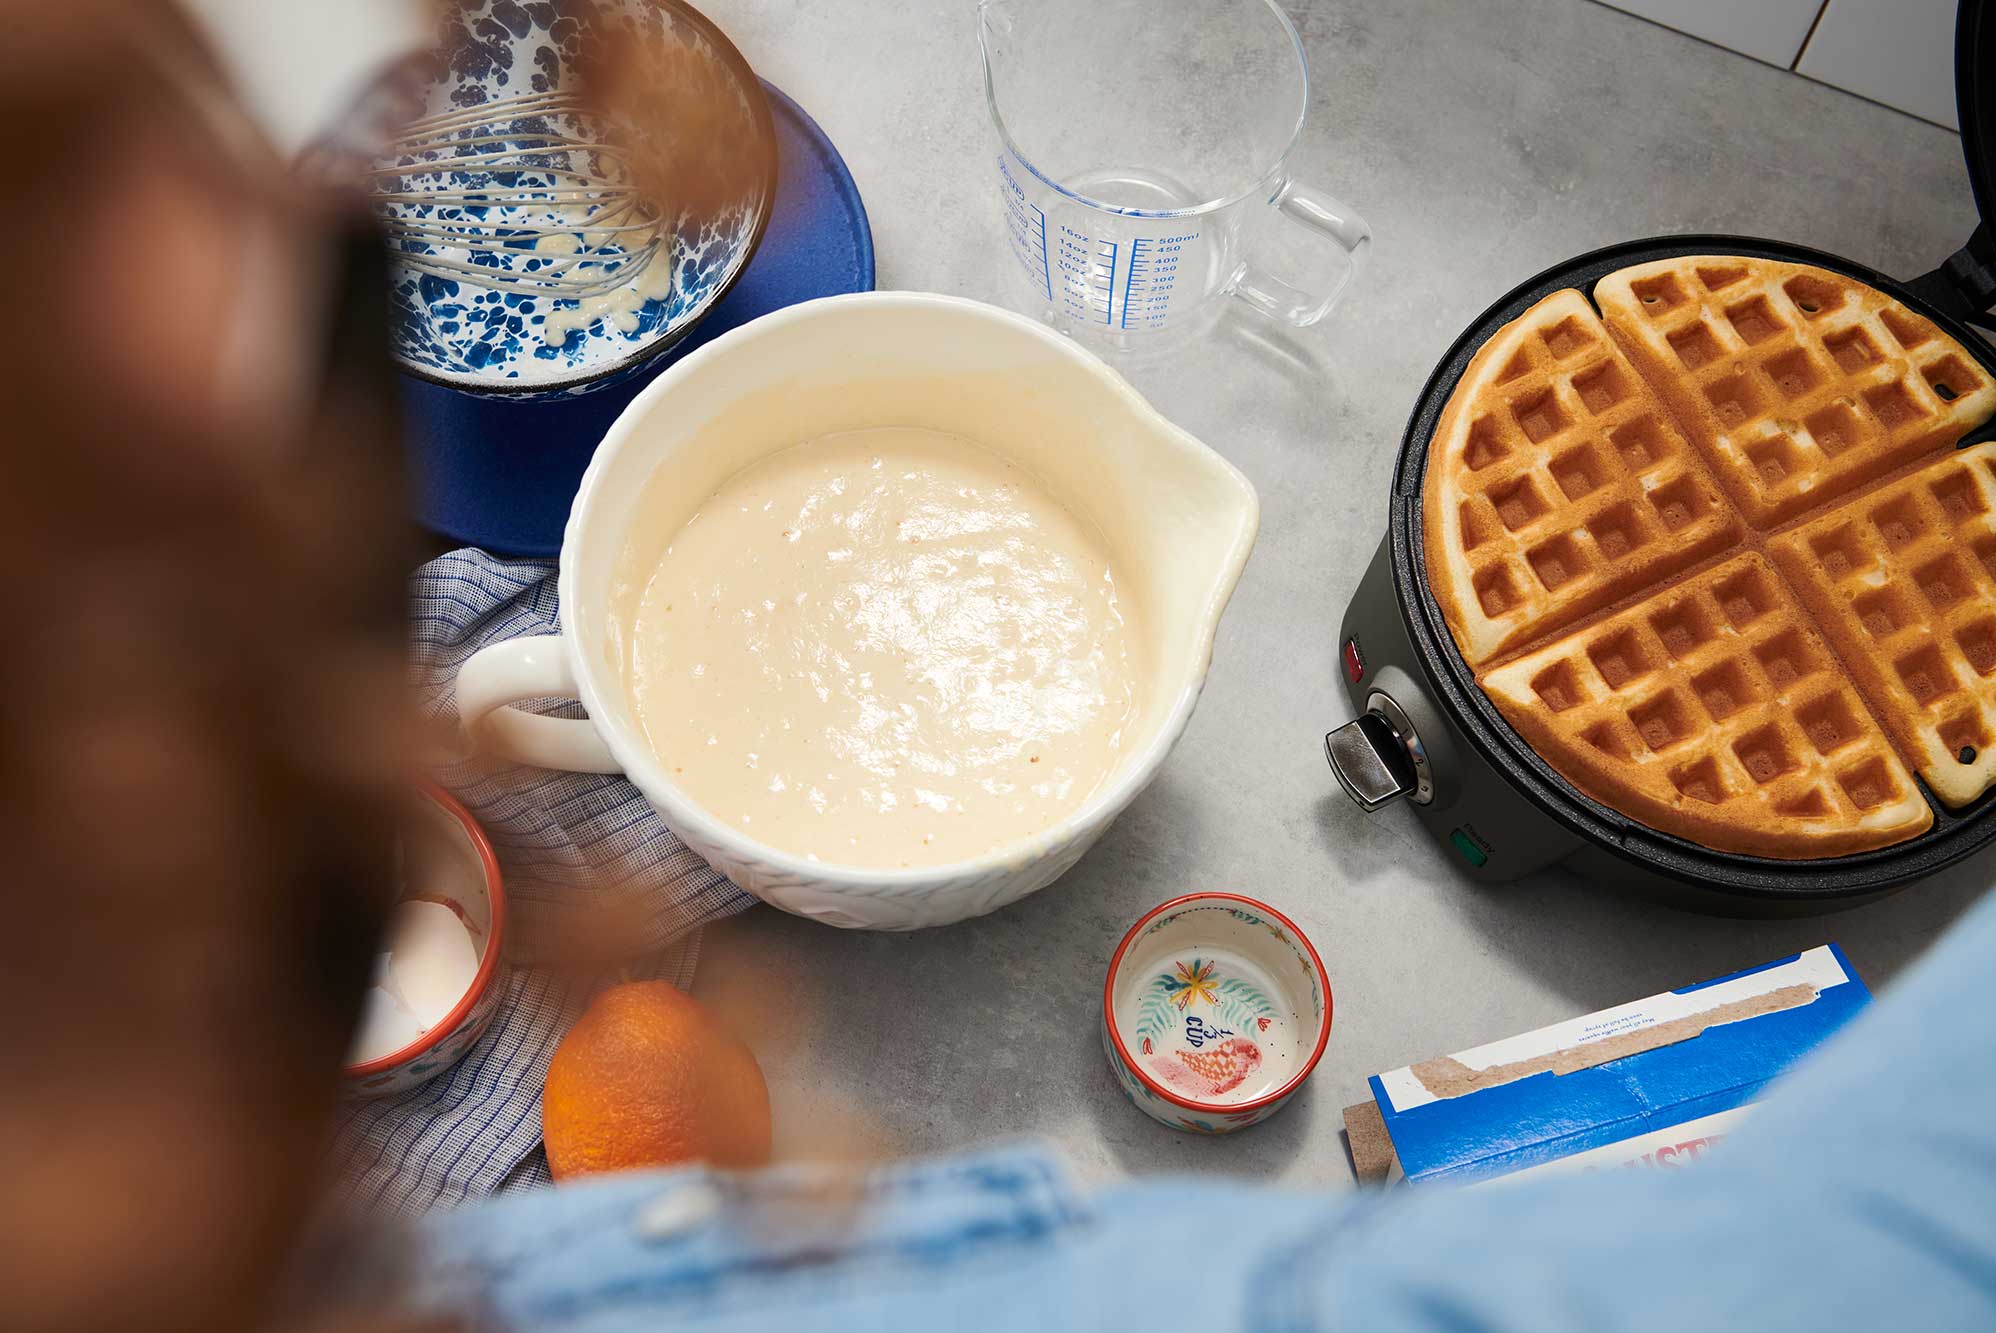 A white mixing bowl full of batter sits next to a waffle maker on a kitchen counter.